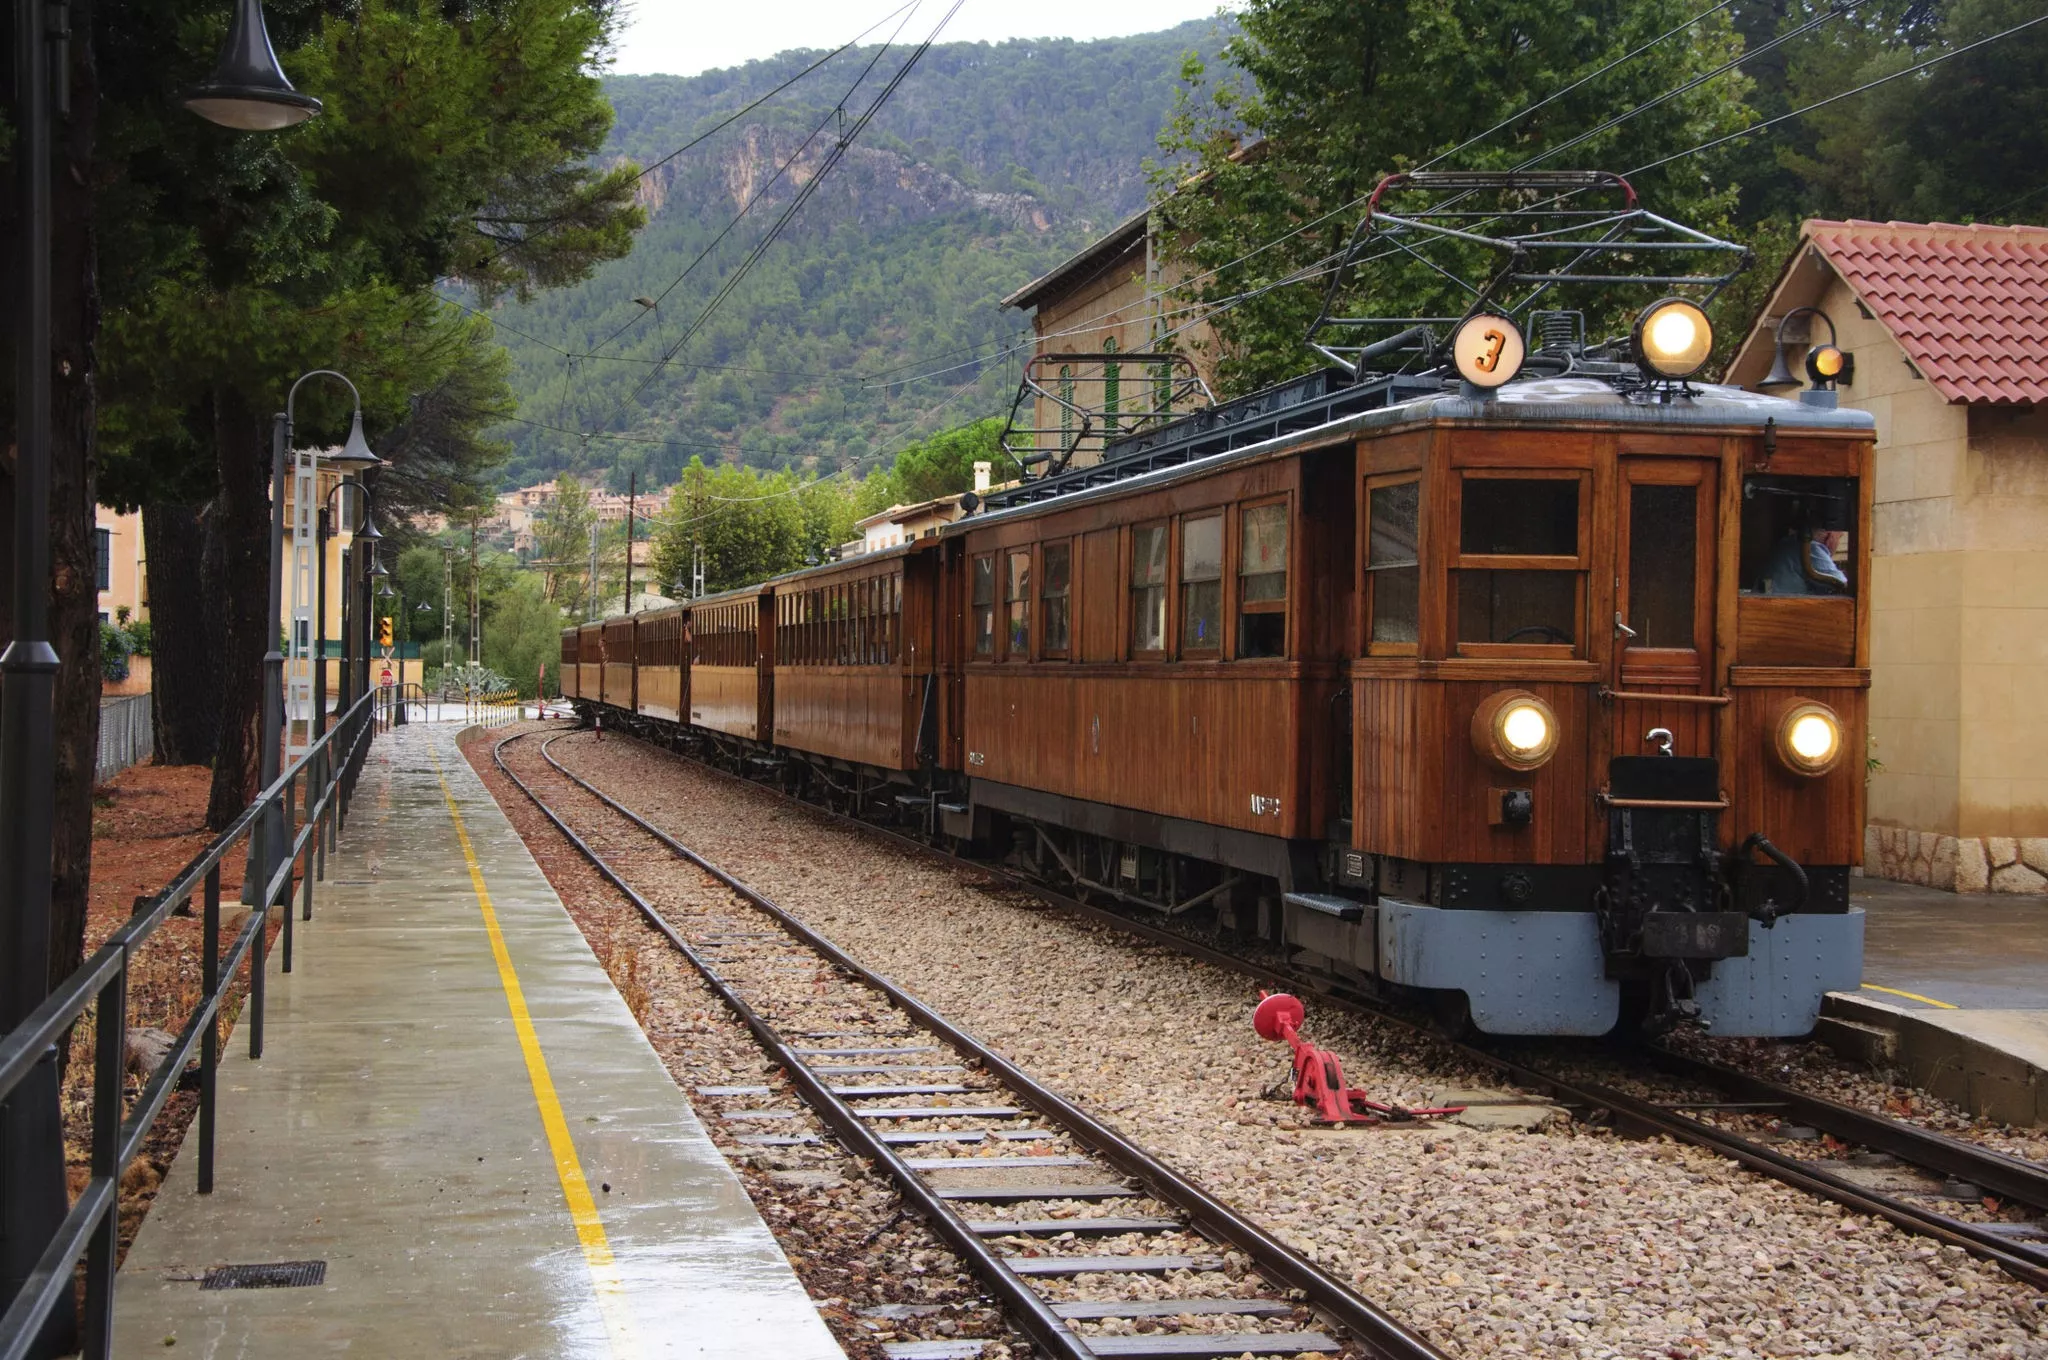 Ferrocarril de Soller in Spain, Europe | Scenic Trains - Rated 5.4